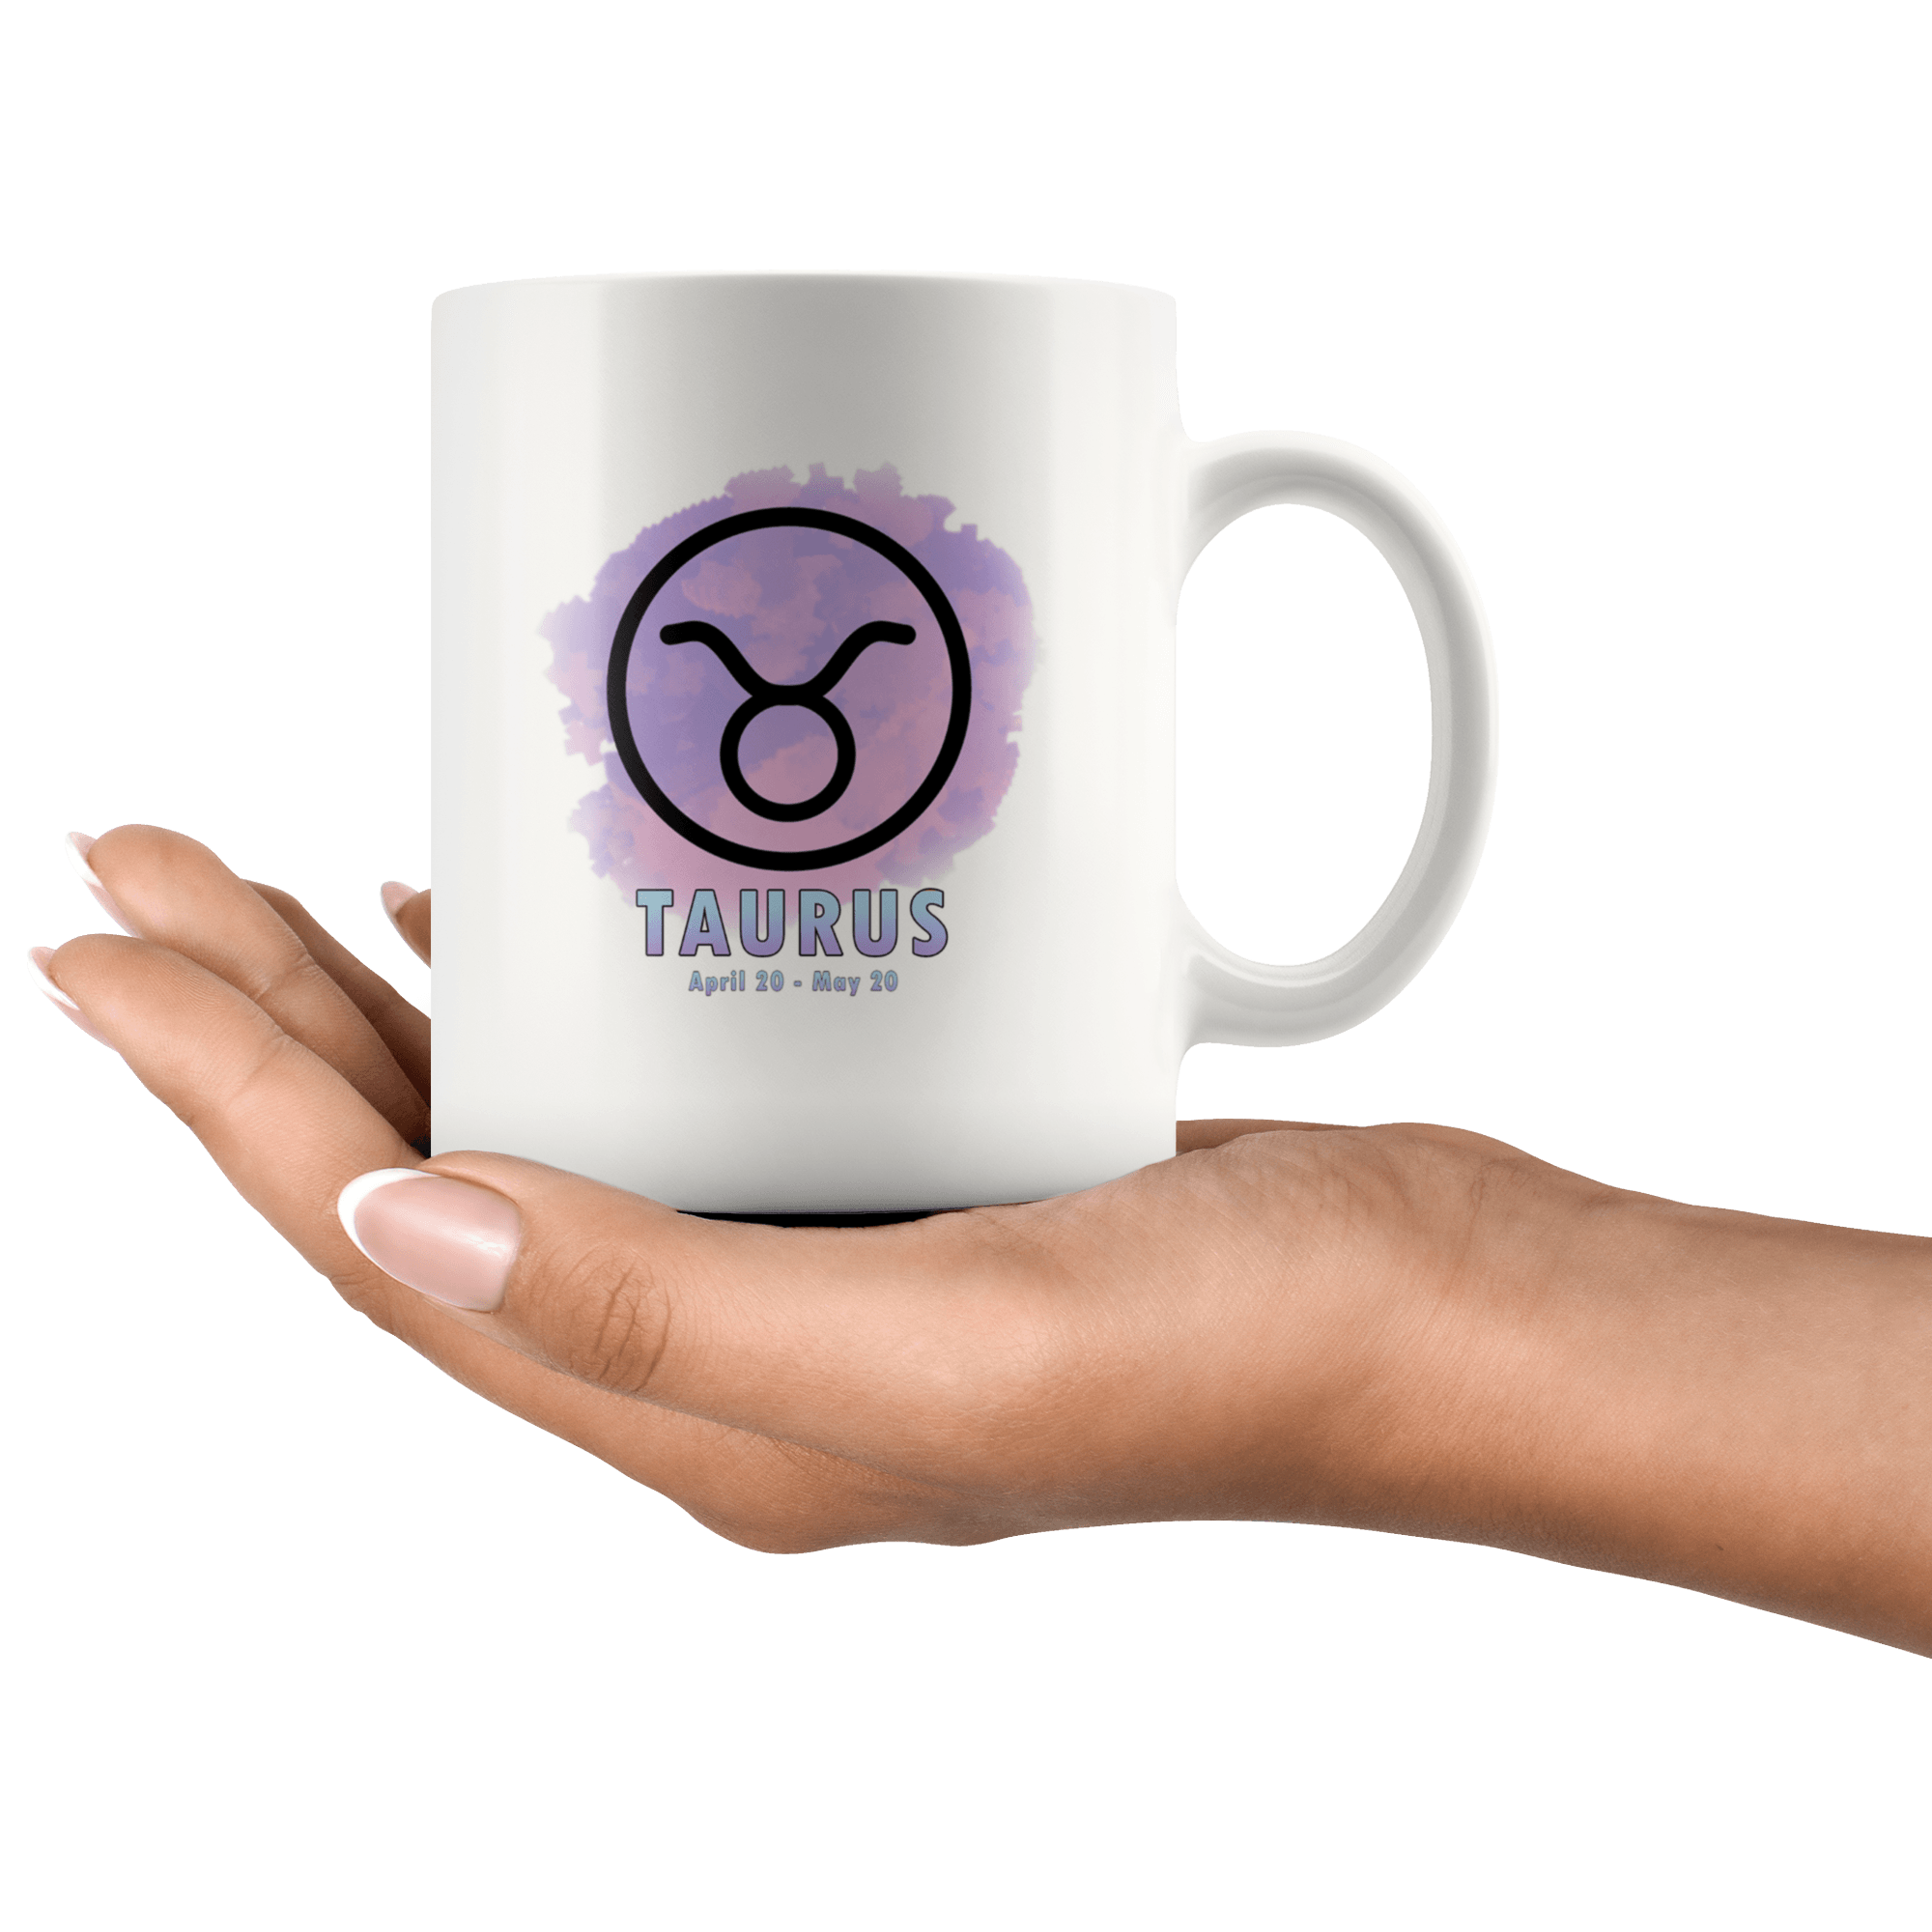 Taurus Coffee Mug - Taurus Constellation Coffee Cup - Zodiac Gifts For Horoscope Lover Born in April or May - SPCM